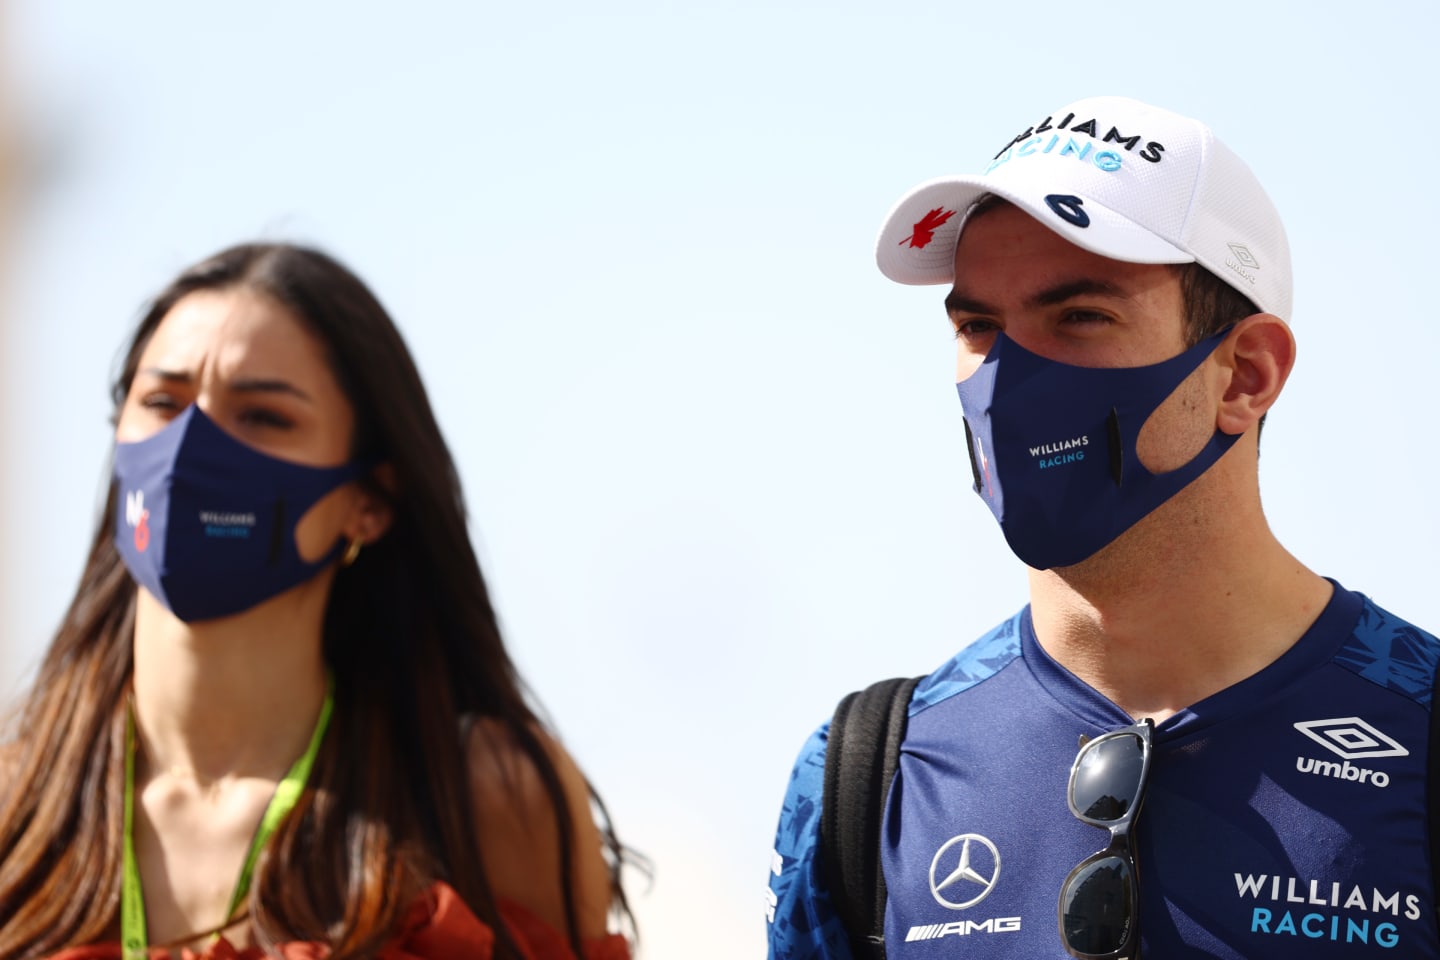 ABU DHABI, UNITED ARAB EMIRATES - DECEMBER 10: Nicholas Latifi of Canada and Williams walks in the Paddock before practice ahead of the F1 Grand Prix of Abu Dhabi at Yas Marina Circuit on December 10, 2021 in Abu Dhabi, United Arab Emirates. (Photo by Mark Thompson/Getty Images)